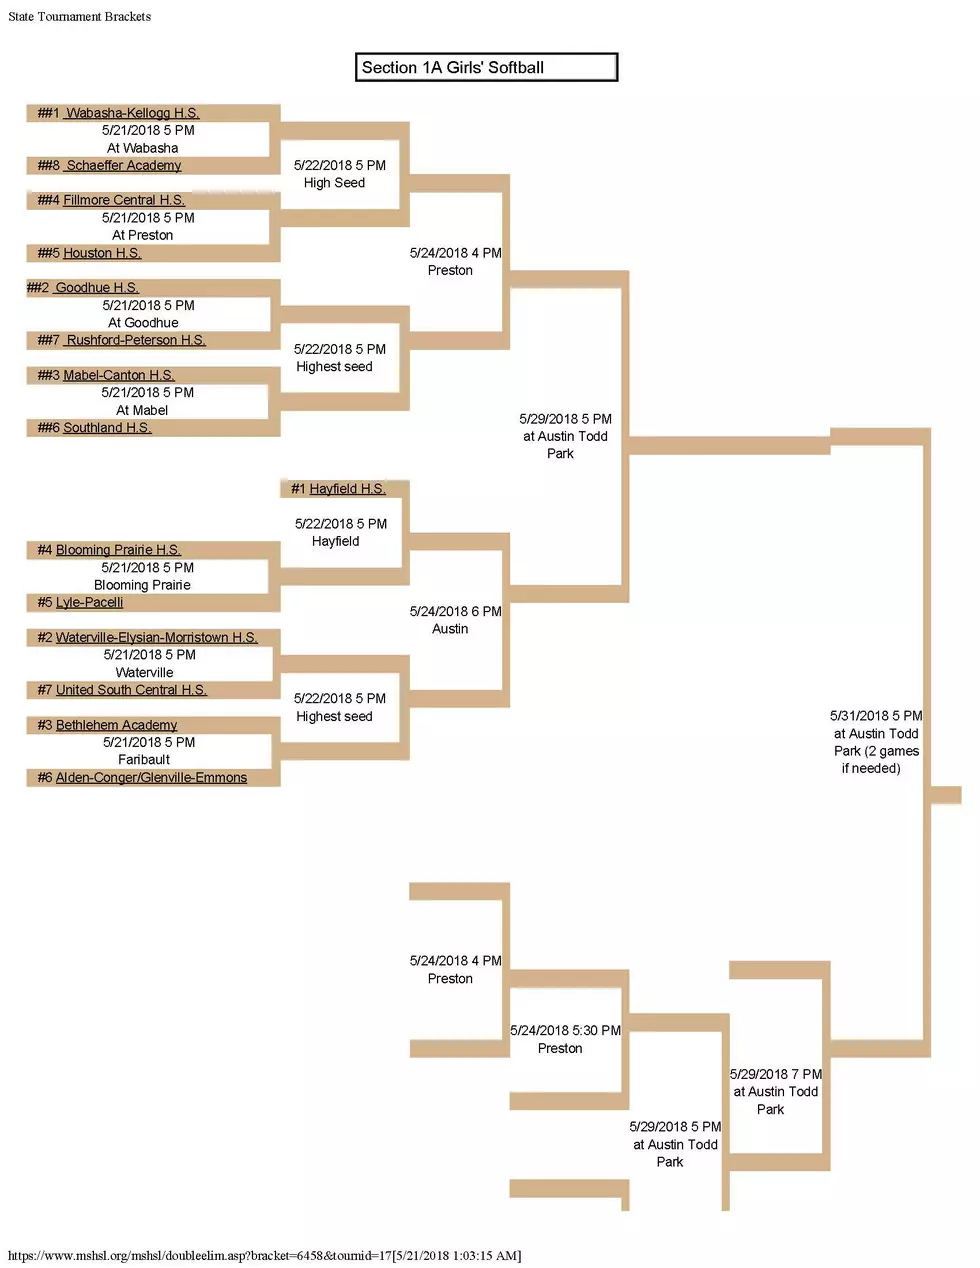 Bethlehem Academy Softball Third Seed in Subsection